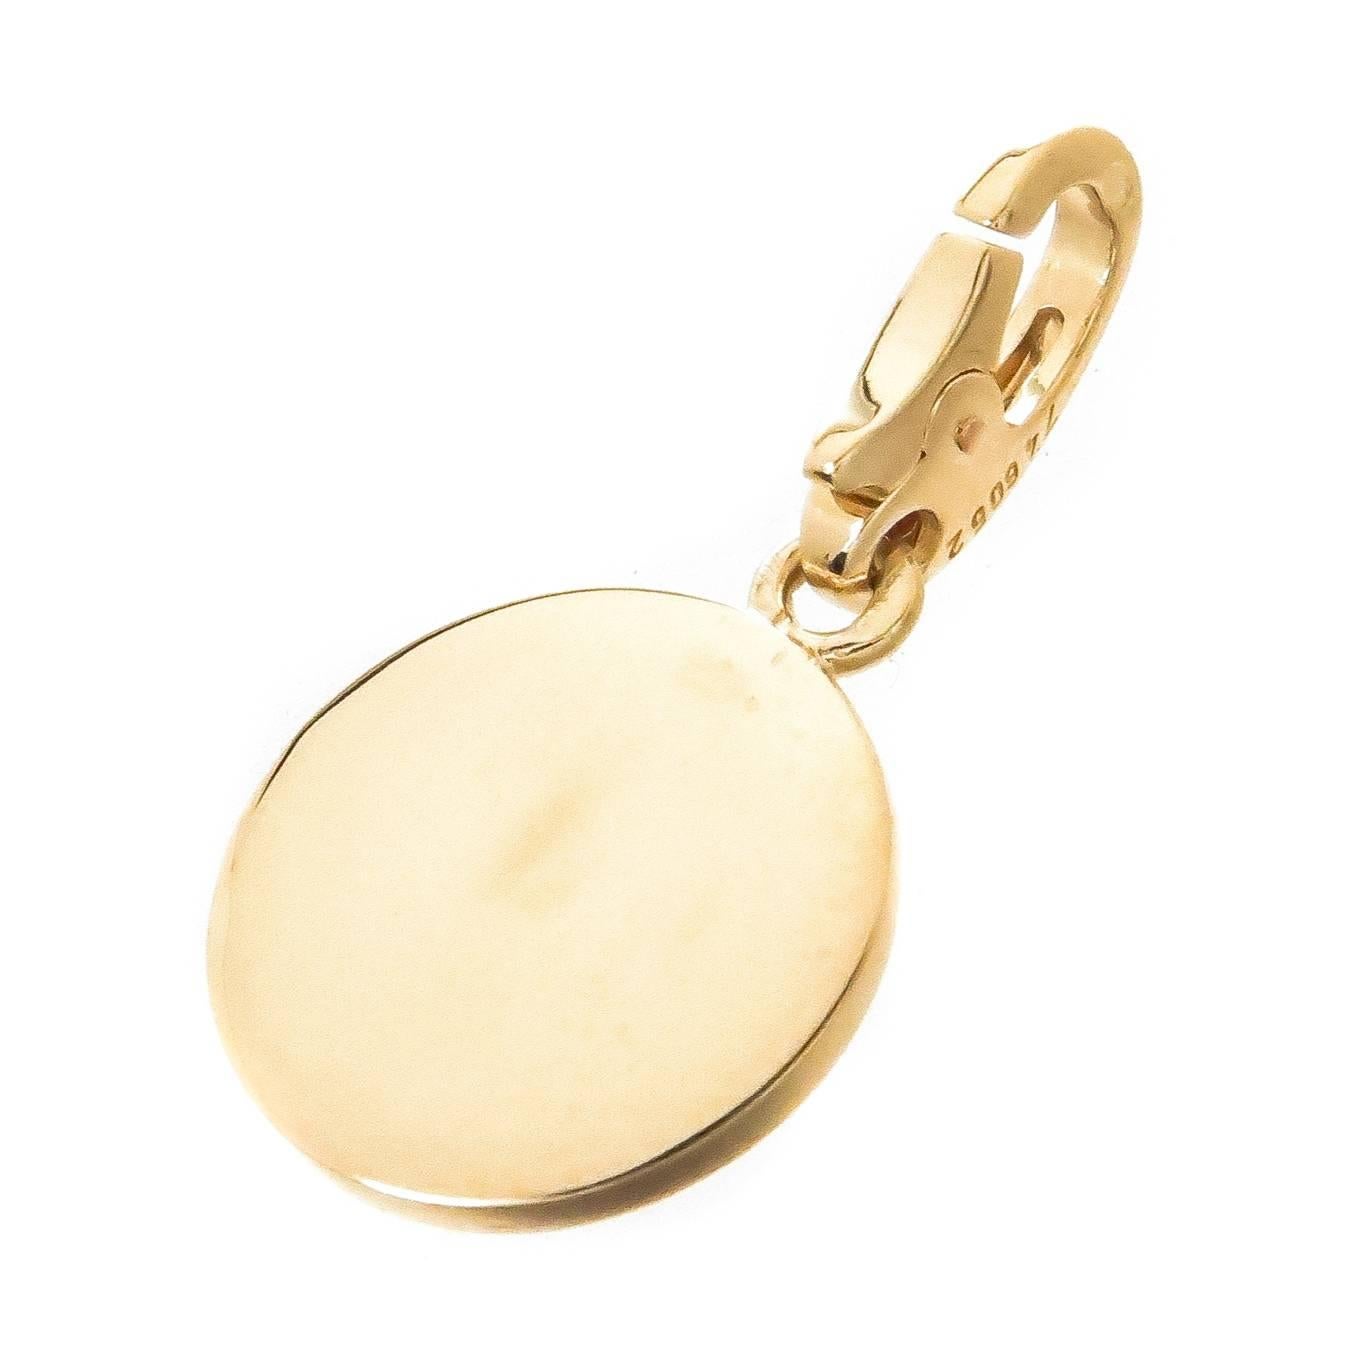 Circa 2005 Cartier 18K Yellow Gold Charm with Applied White Gold and Diamond set Cross, measuring 1/2 inch in diameter and set with Fine Round Brilliant cut Diamonds totaling .15 carat.  having a Lobster claw lock for easy take on and off to be worn